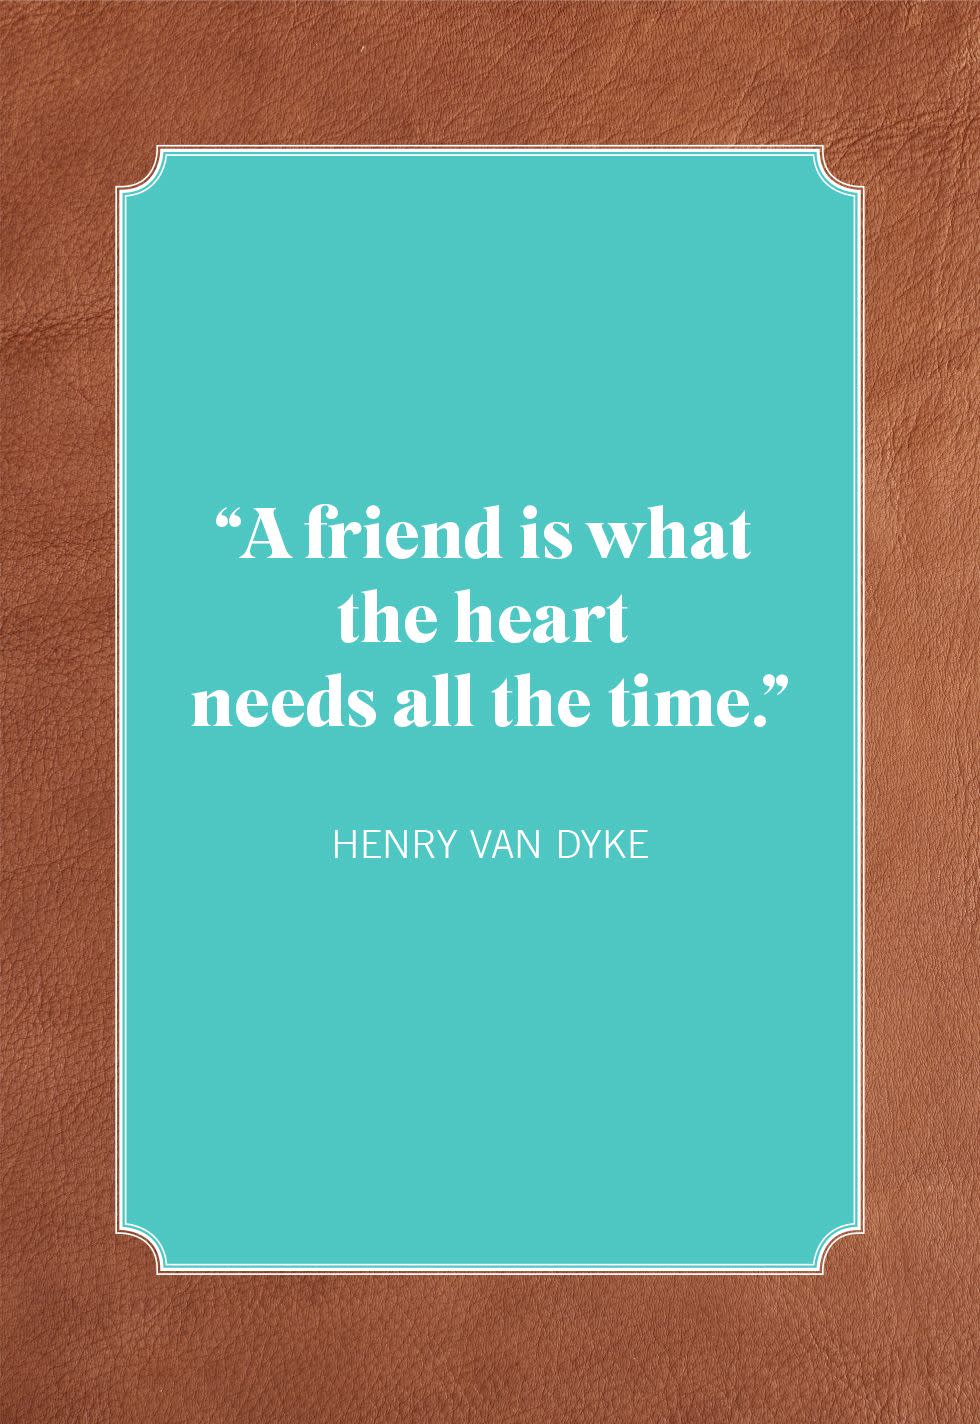 valentines day quotes for friends henry van dyke